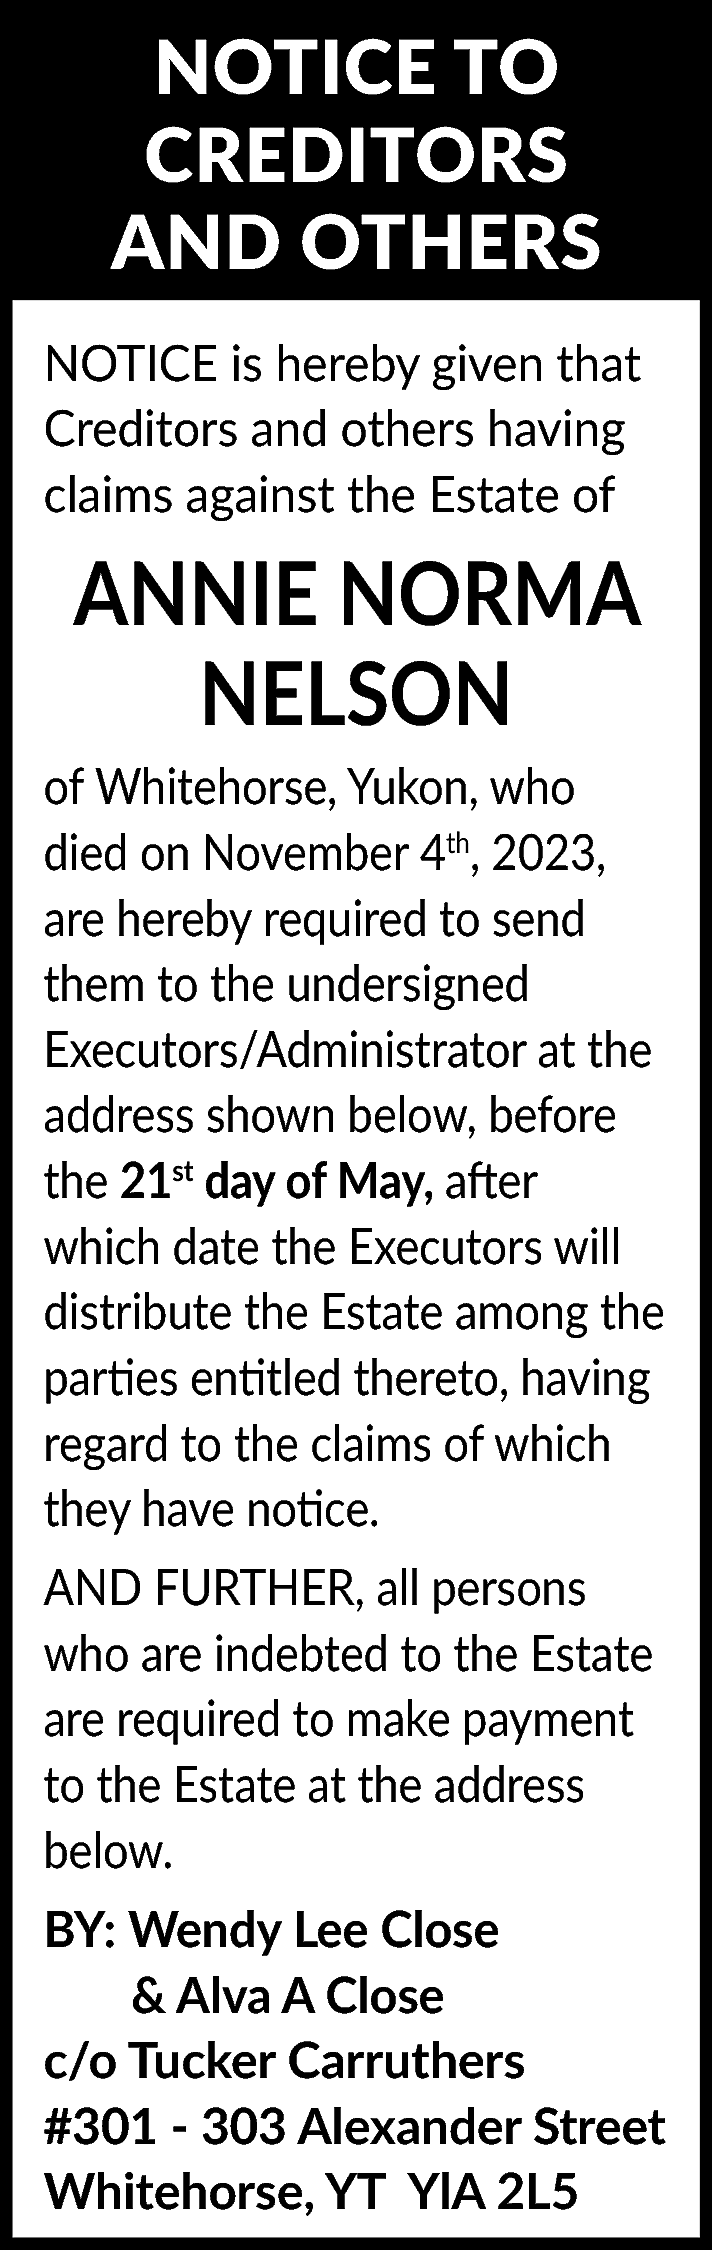 NOTICE TO <br>CREDITORS <br>AND OTHERS  NOTICE TO  CREDITORS  AND OTHERS  NOTICE is hereby given that  Creditors and others having  claims against the Estate of    ANNIE NORMA  NELSON  of Whitehorse, Yukon, who  died on November 4th, 2023,  are hereby required to send  them to the undersigned  Executors/Administrator at the  address shown below, before  the 21st day of May, after  which date the Executors will  distribute the Estate among the  parties entitled thereto, having  regard to the claims of which  they have notice.  AND FURTHER, all persons  who are indebted to the Estate  are required to make payment  to the Estate at the address  below.  BY: Wendy Lee Close  & Alva A Close  c/o Tucker Carruthers  #301 - 303 Alexander Street  Whitehorse, YT YlA 2L5    